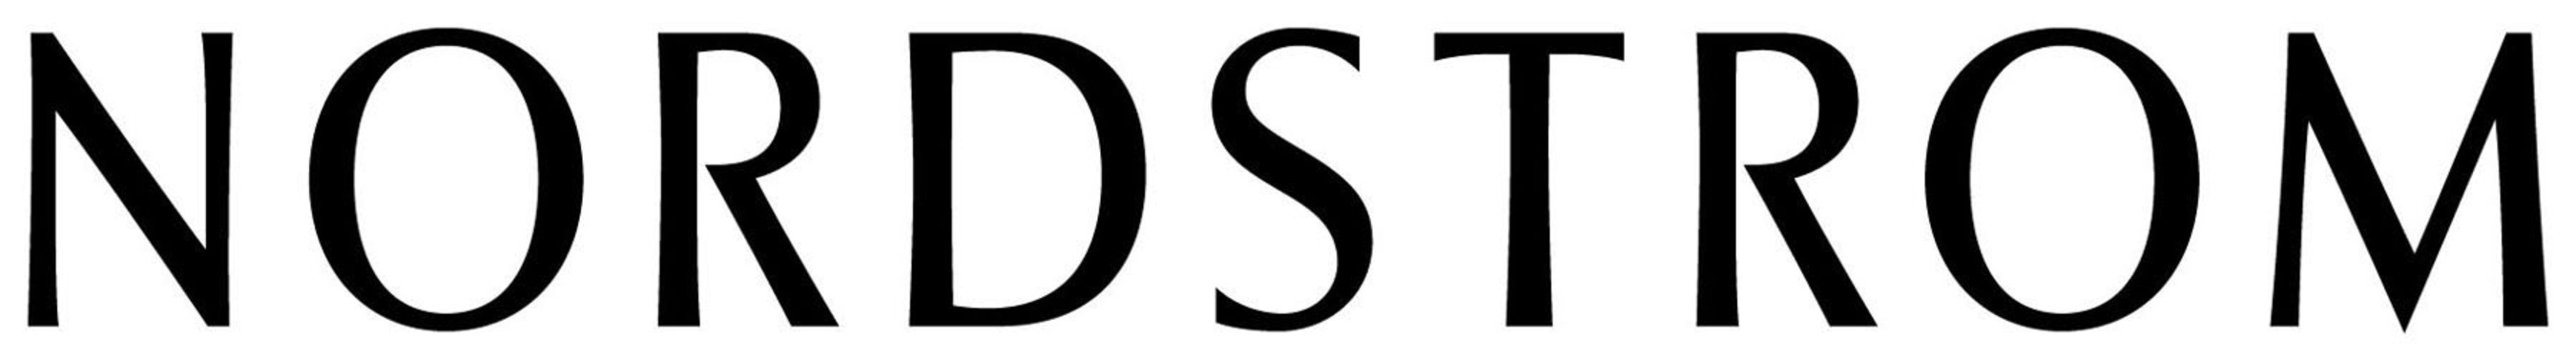 Nordstrom Incorporated logo